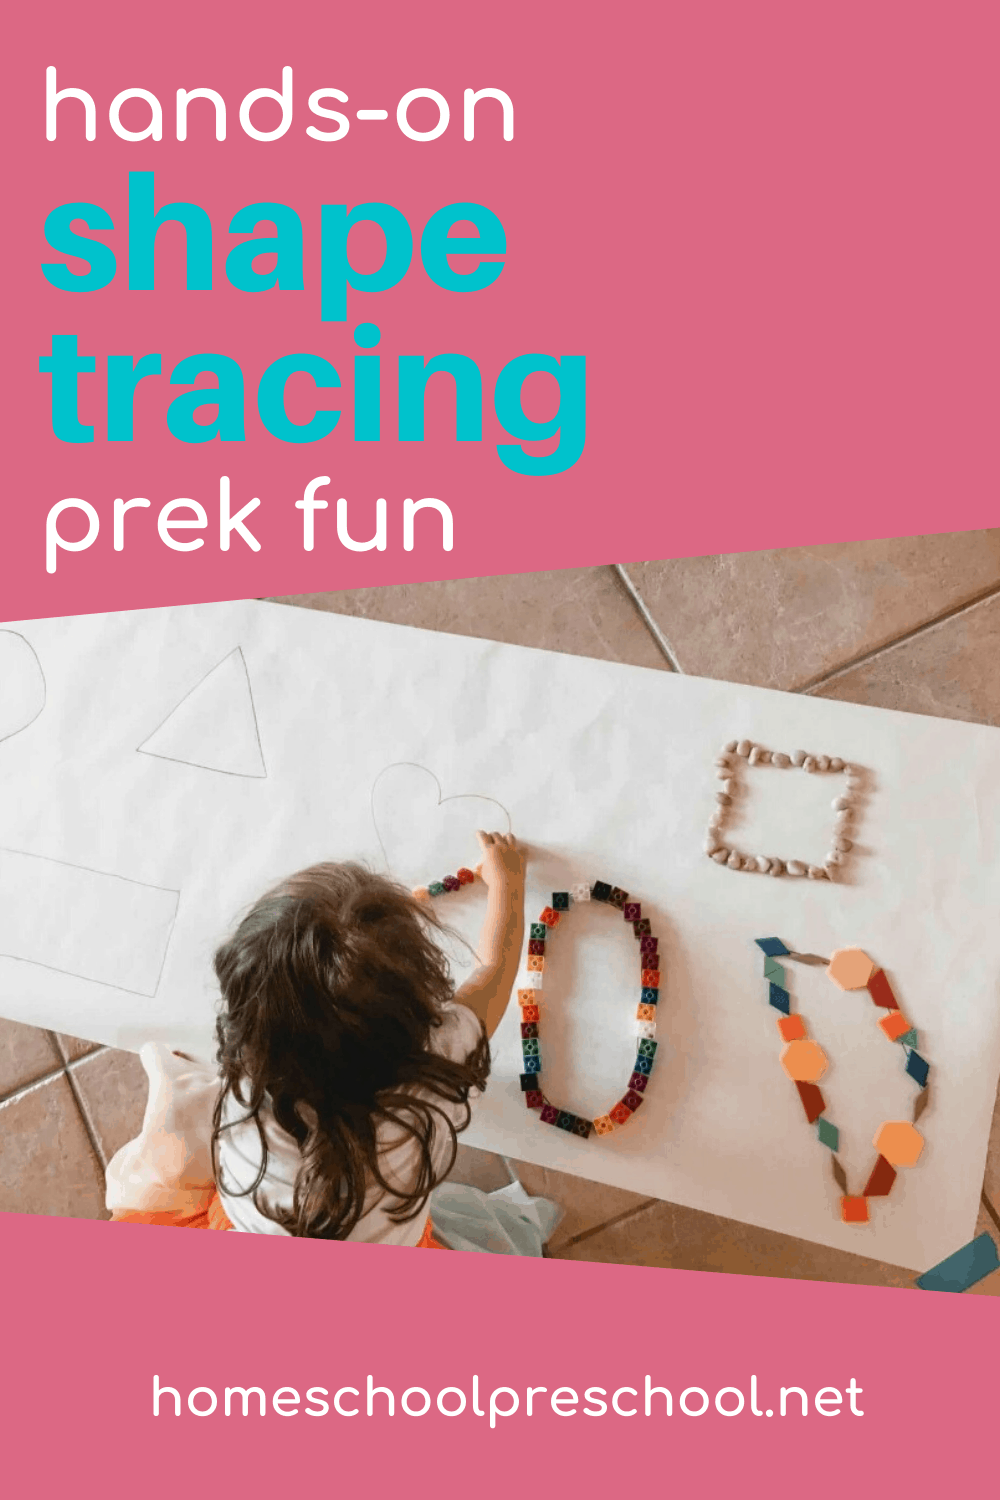 Hands-On Teaching Shapes for Kids